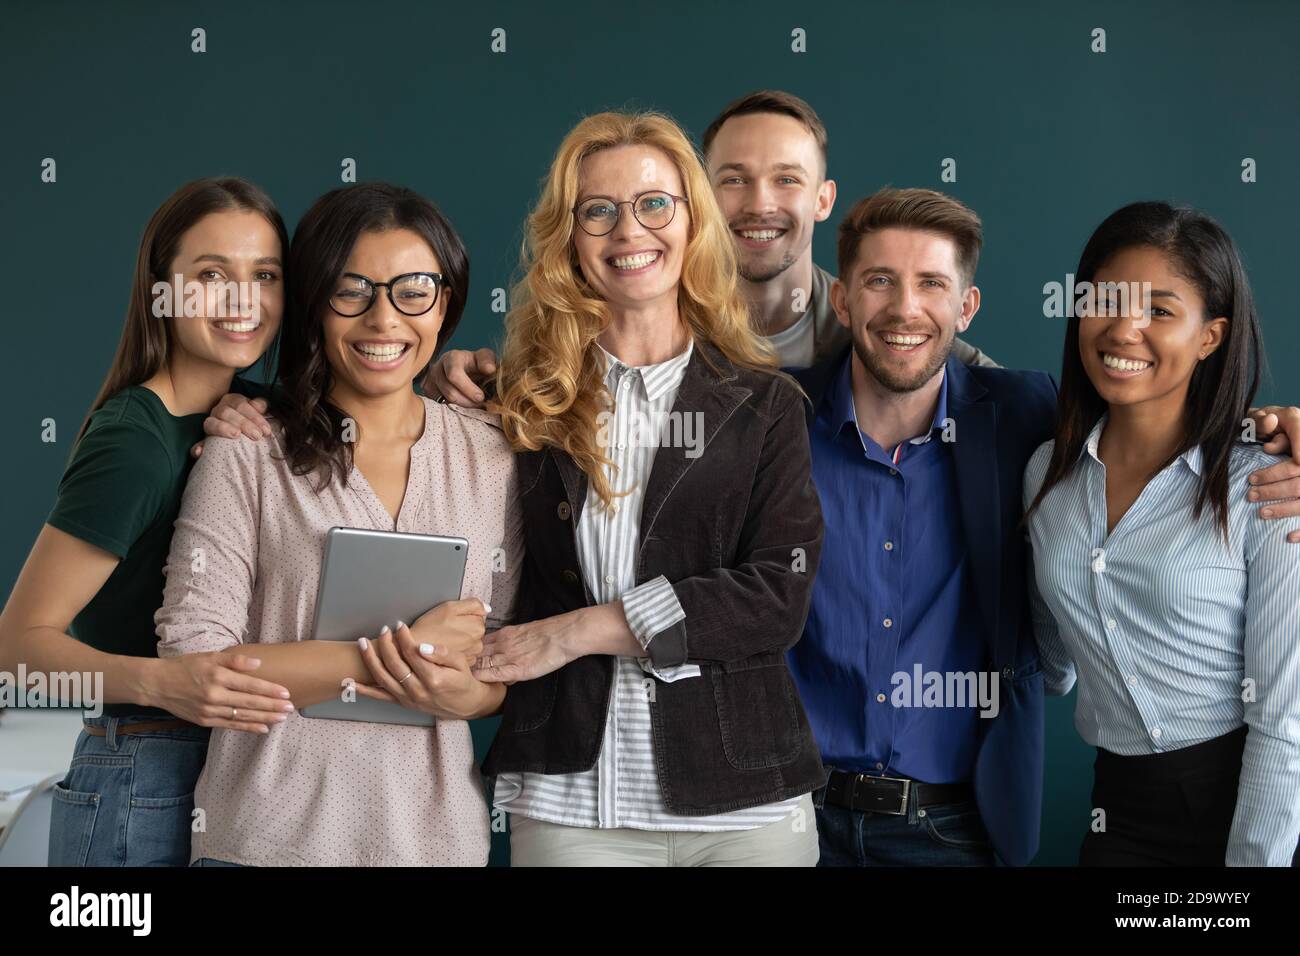 Group portrait of happy ambitious motivated multiethnic team standing together Stock Photo